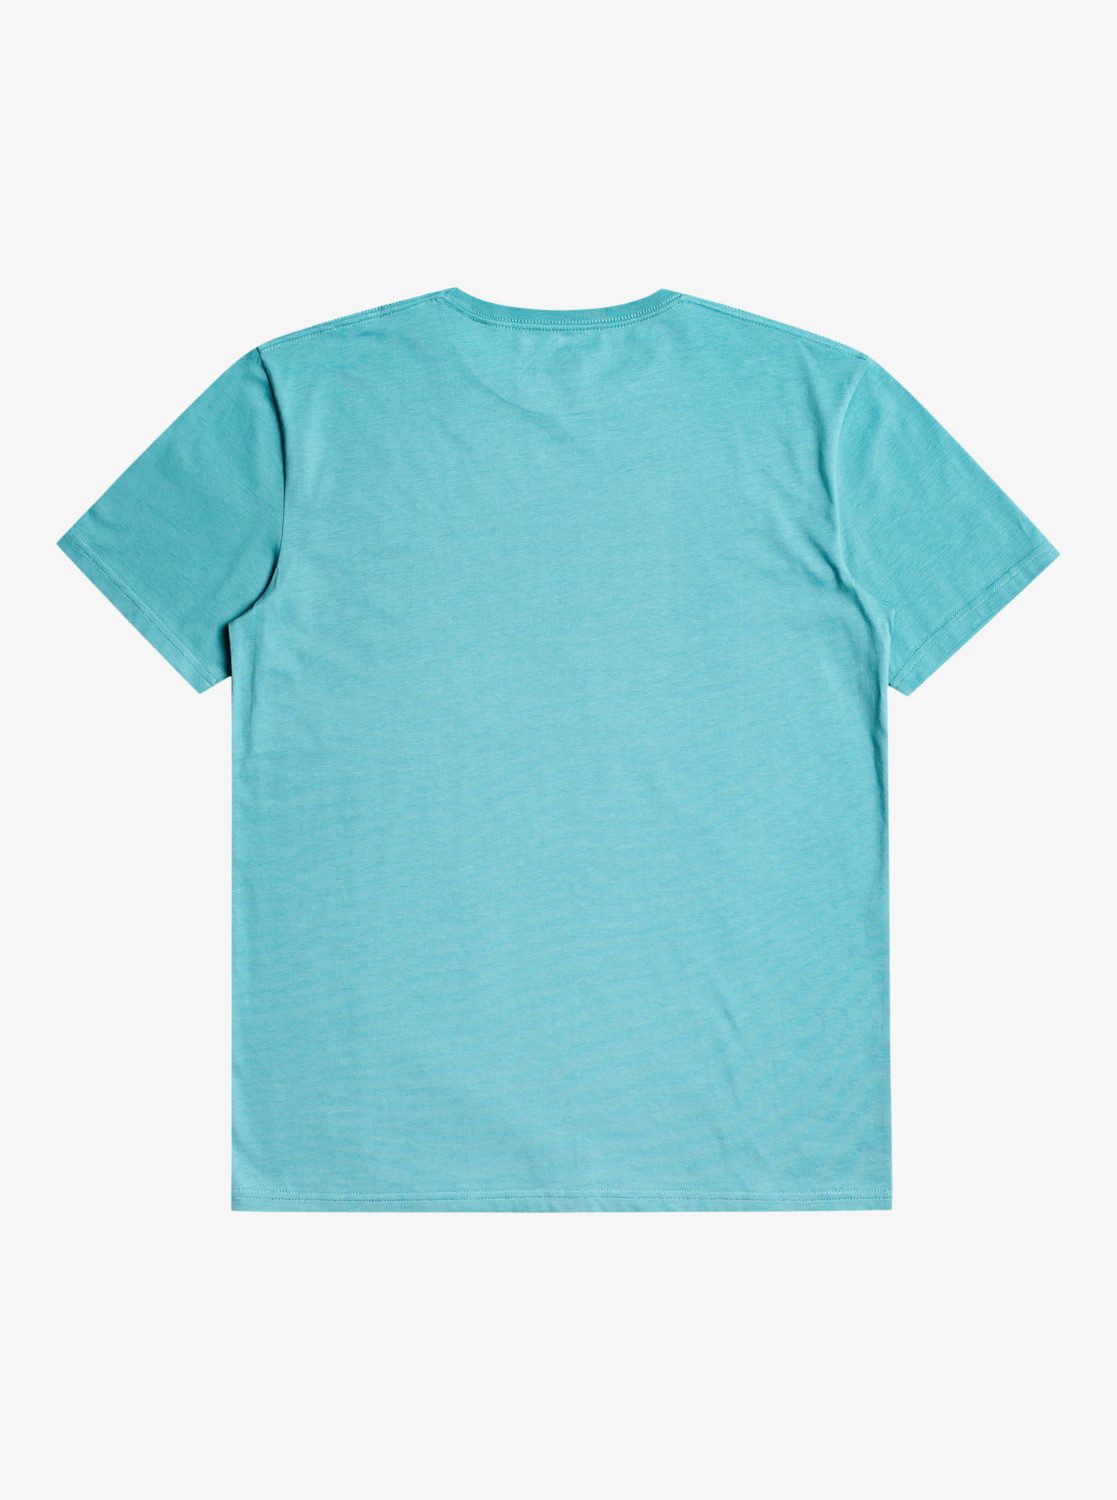 T-Shirt Lines Brittany Quiksilver The Blue Between